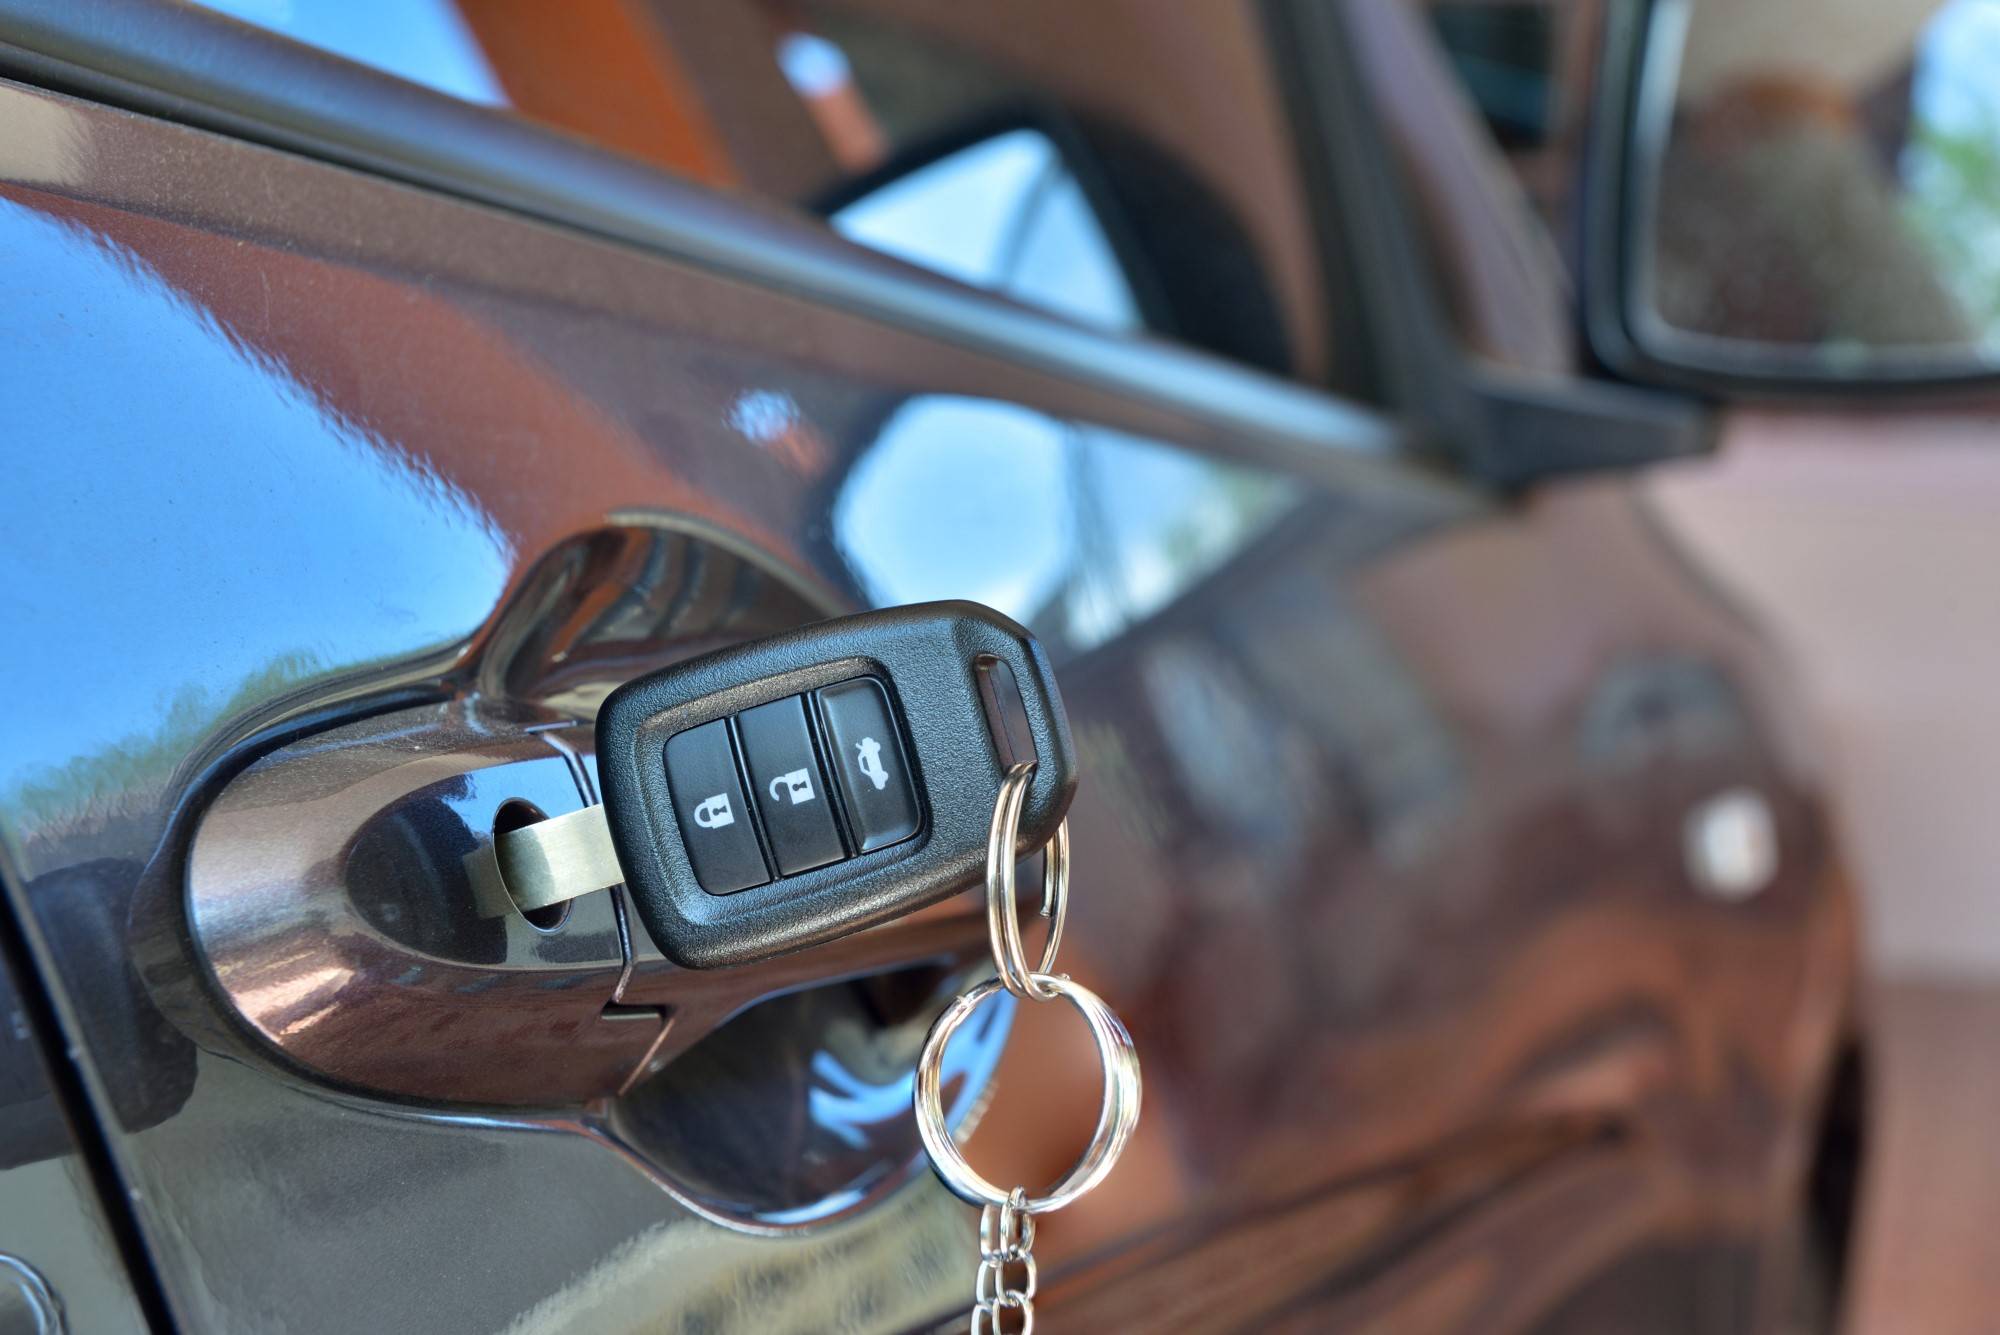 FIND OUT HOW A KEY-BAK RETRACTABLE KEYCHAIN MAY JUST PREVENT THE THEFT